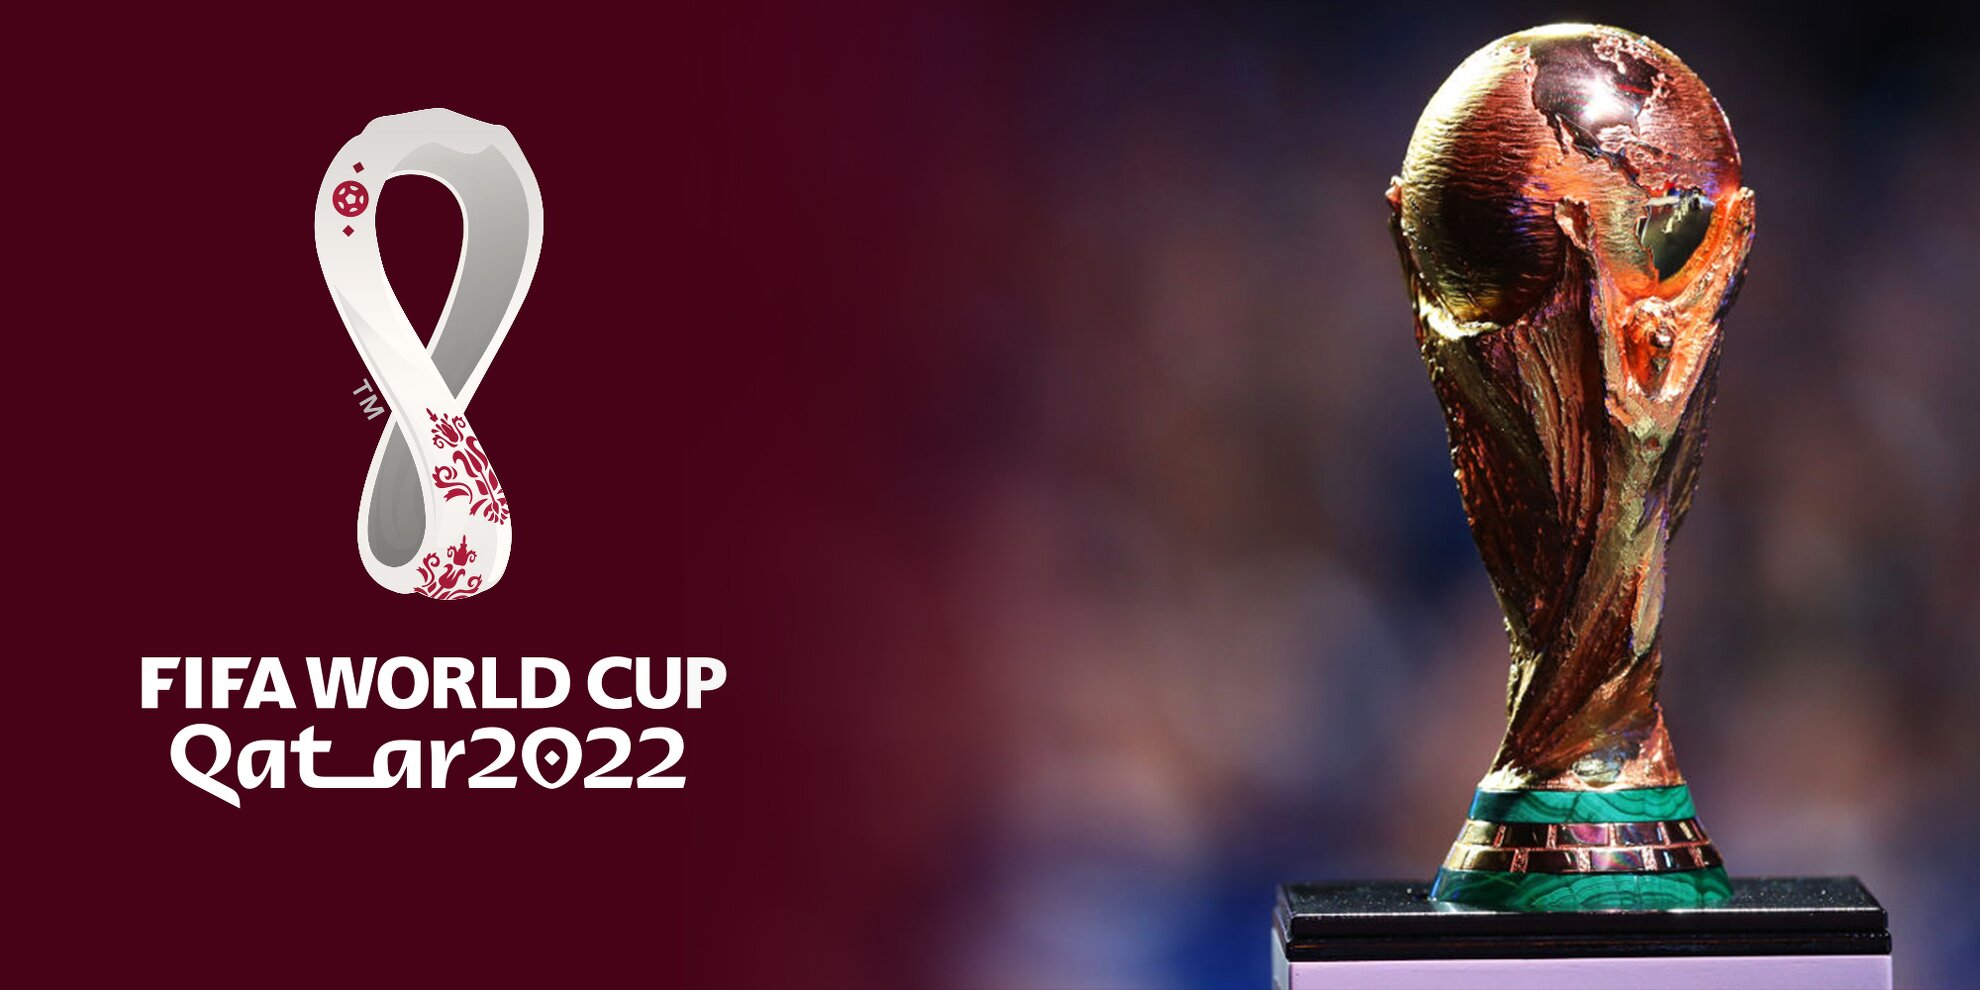 When will the 2022 World Cup take place?